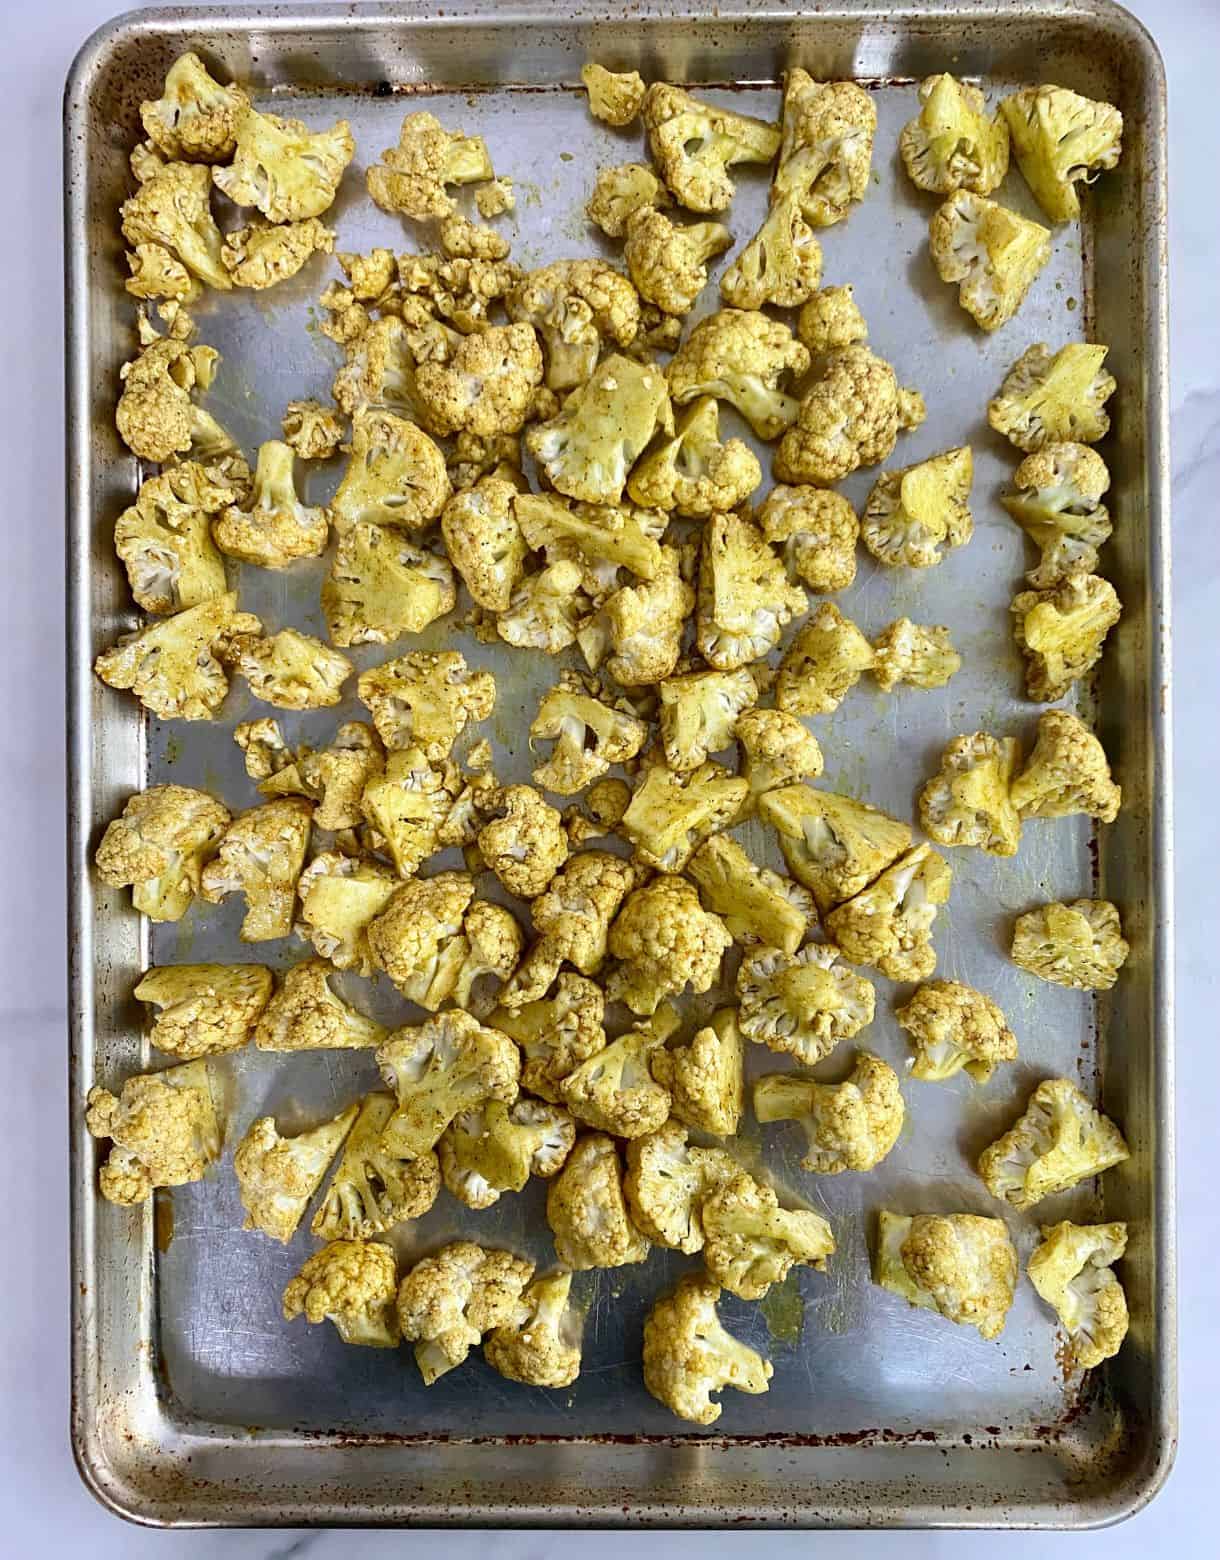 A sheet pan of raw seasoned cauliflower ready to go in the oven.